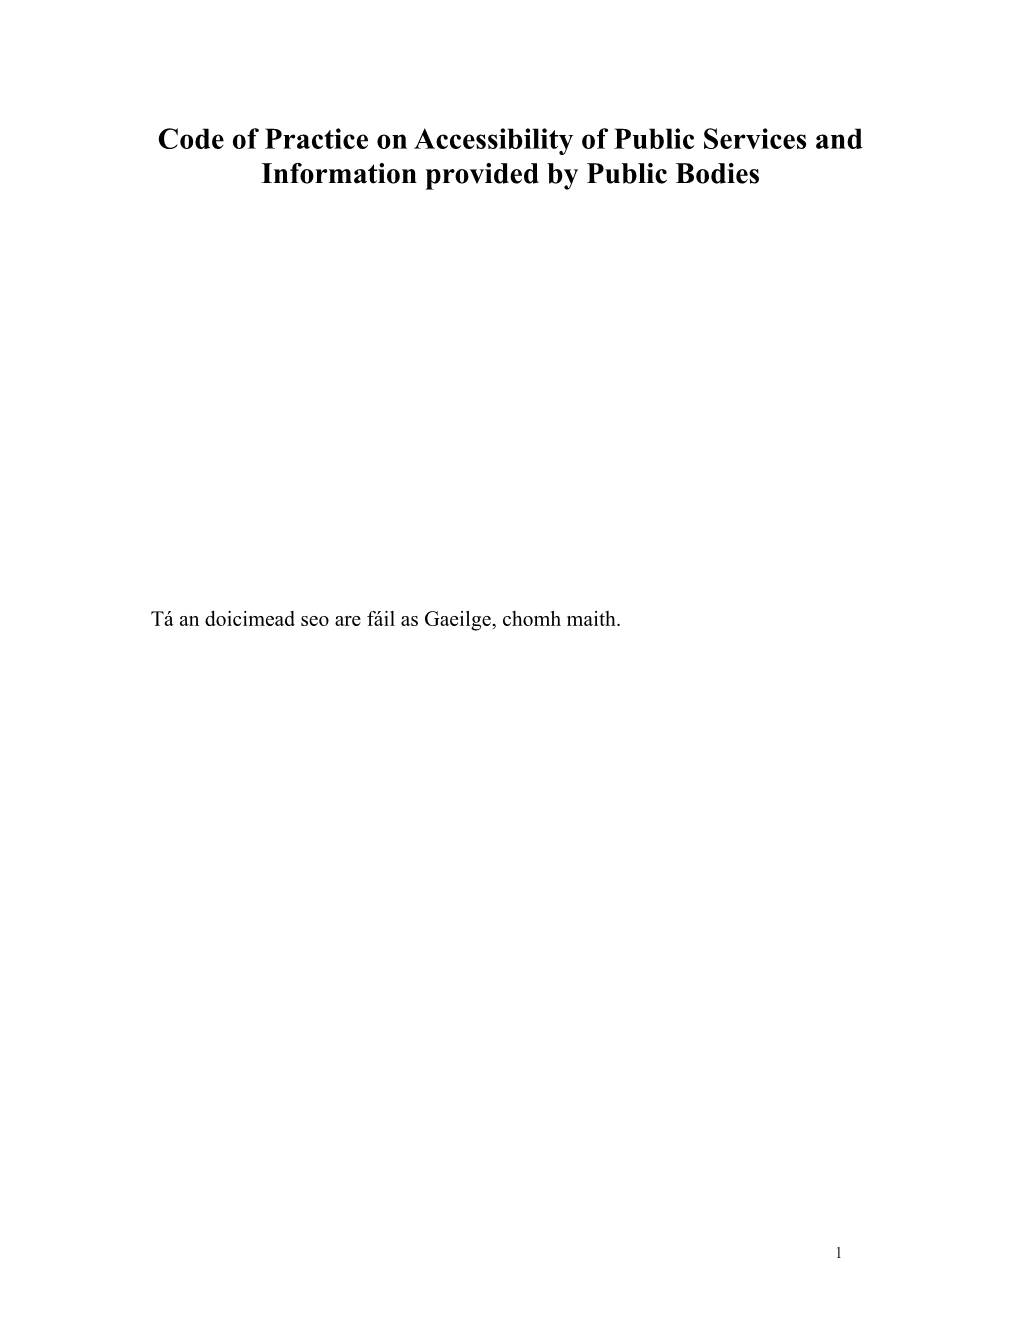 Code of Practice on Accessibility of Public Services and Information Provided by Public Bodies